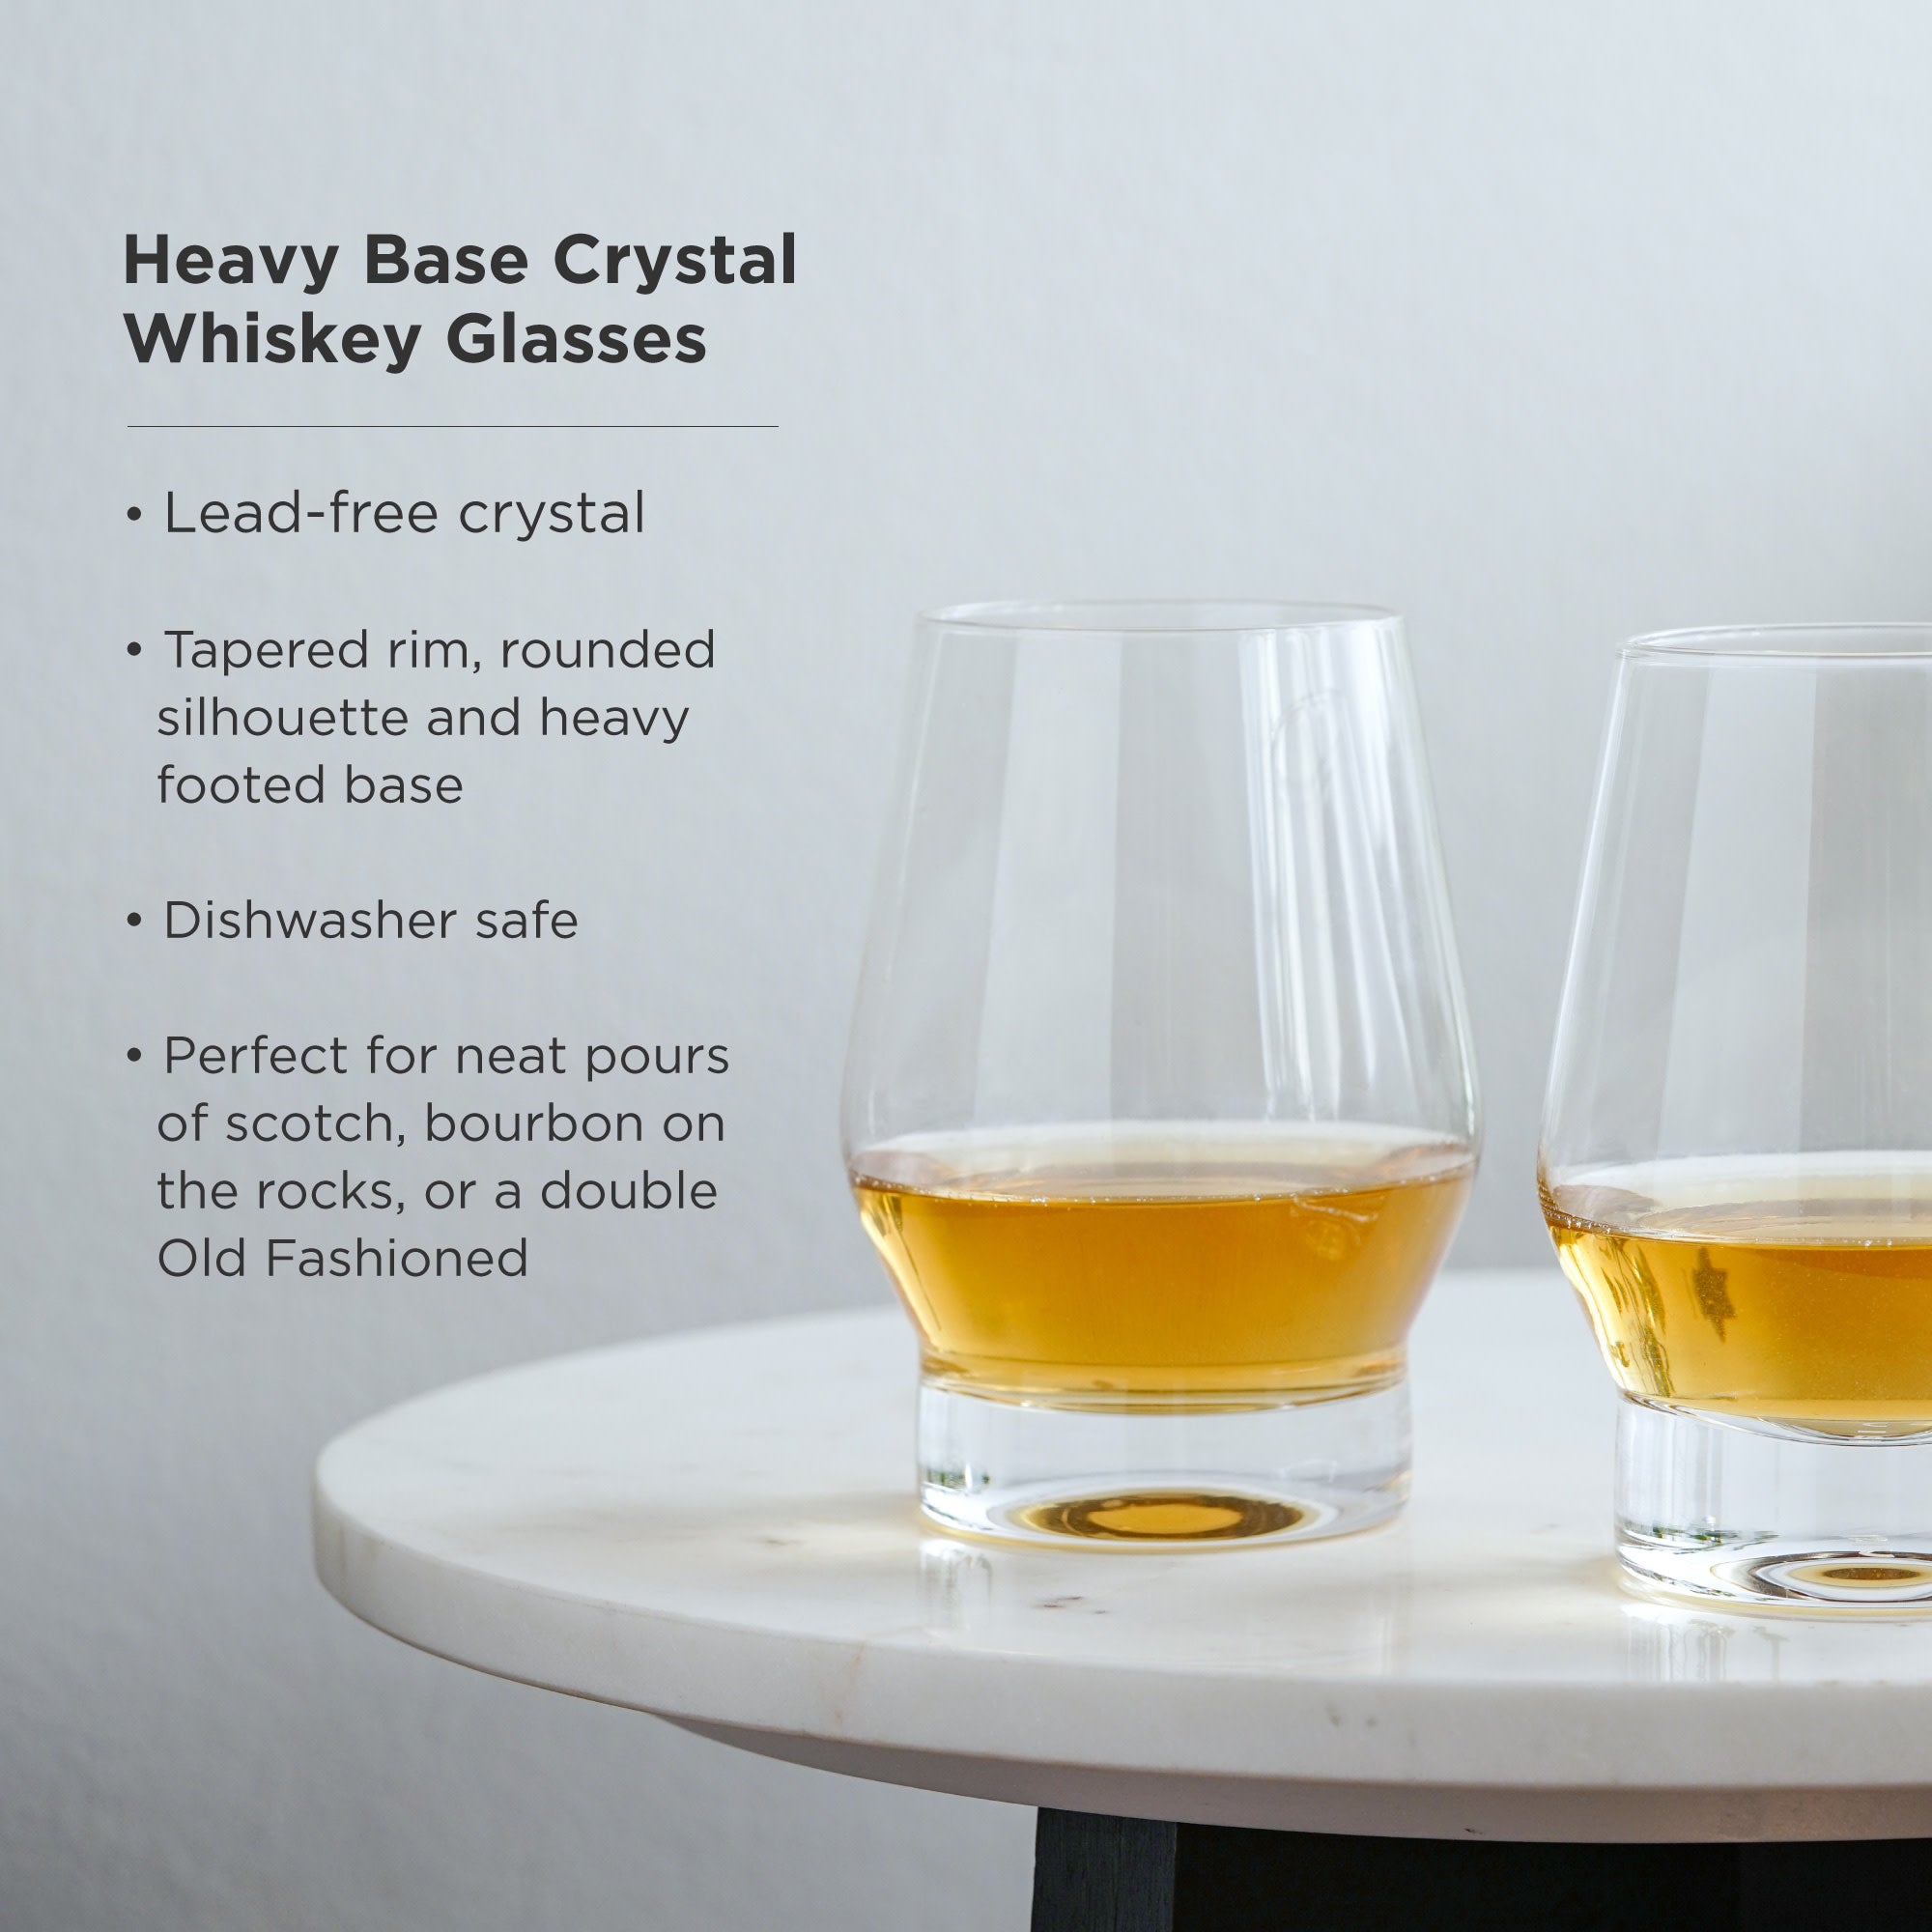 Whiskey Punt Glasses (set of 2) by The Whiskey Ball